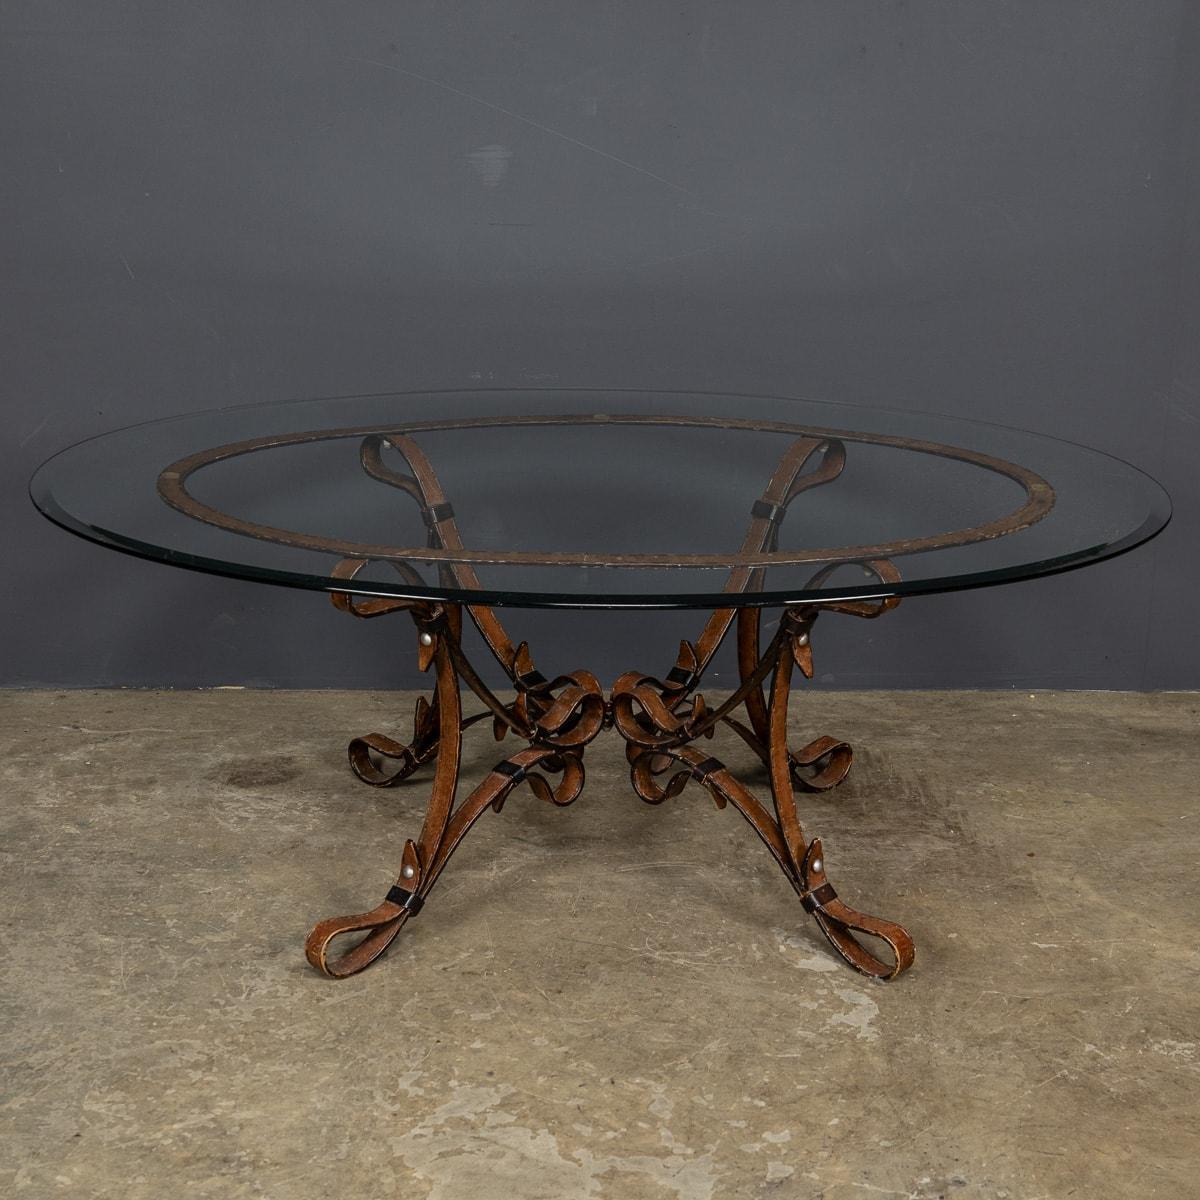 A superb late-20th Century coffee table featuring cold painted wrought iron straps meticulously crafted with intricate details. The straps elegantly converge, forming a sturdy base for an oval, beveled glass top. This cleverly designed piece boasts